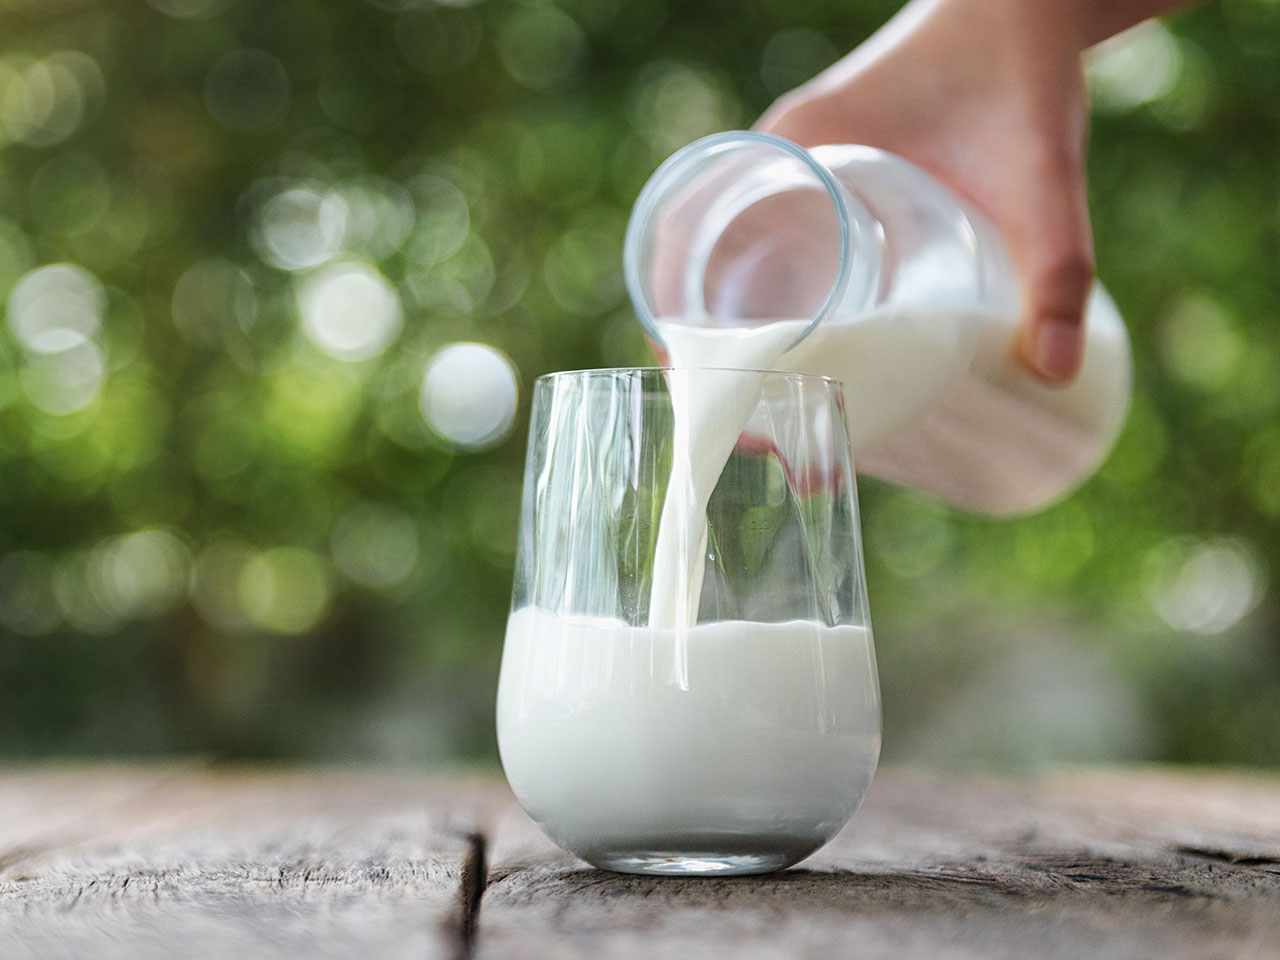 Revealed: The Best and Worst Milks — and How to Make Them at Home!